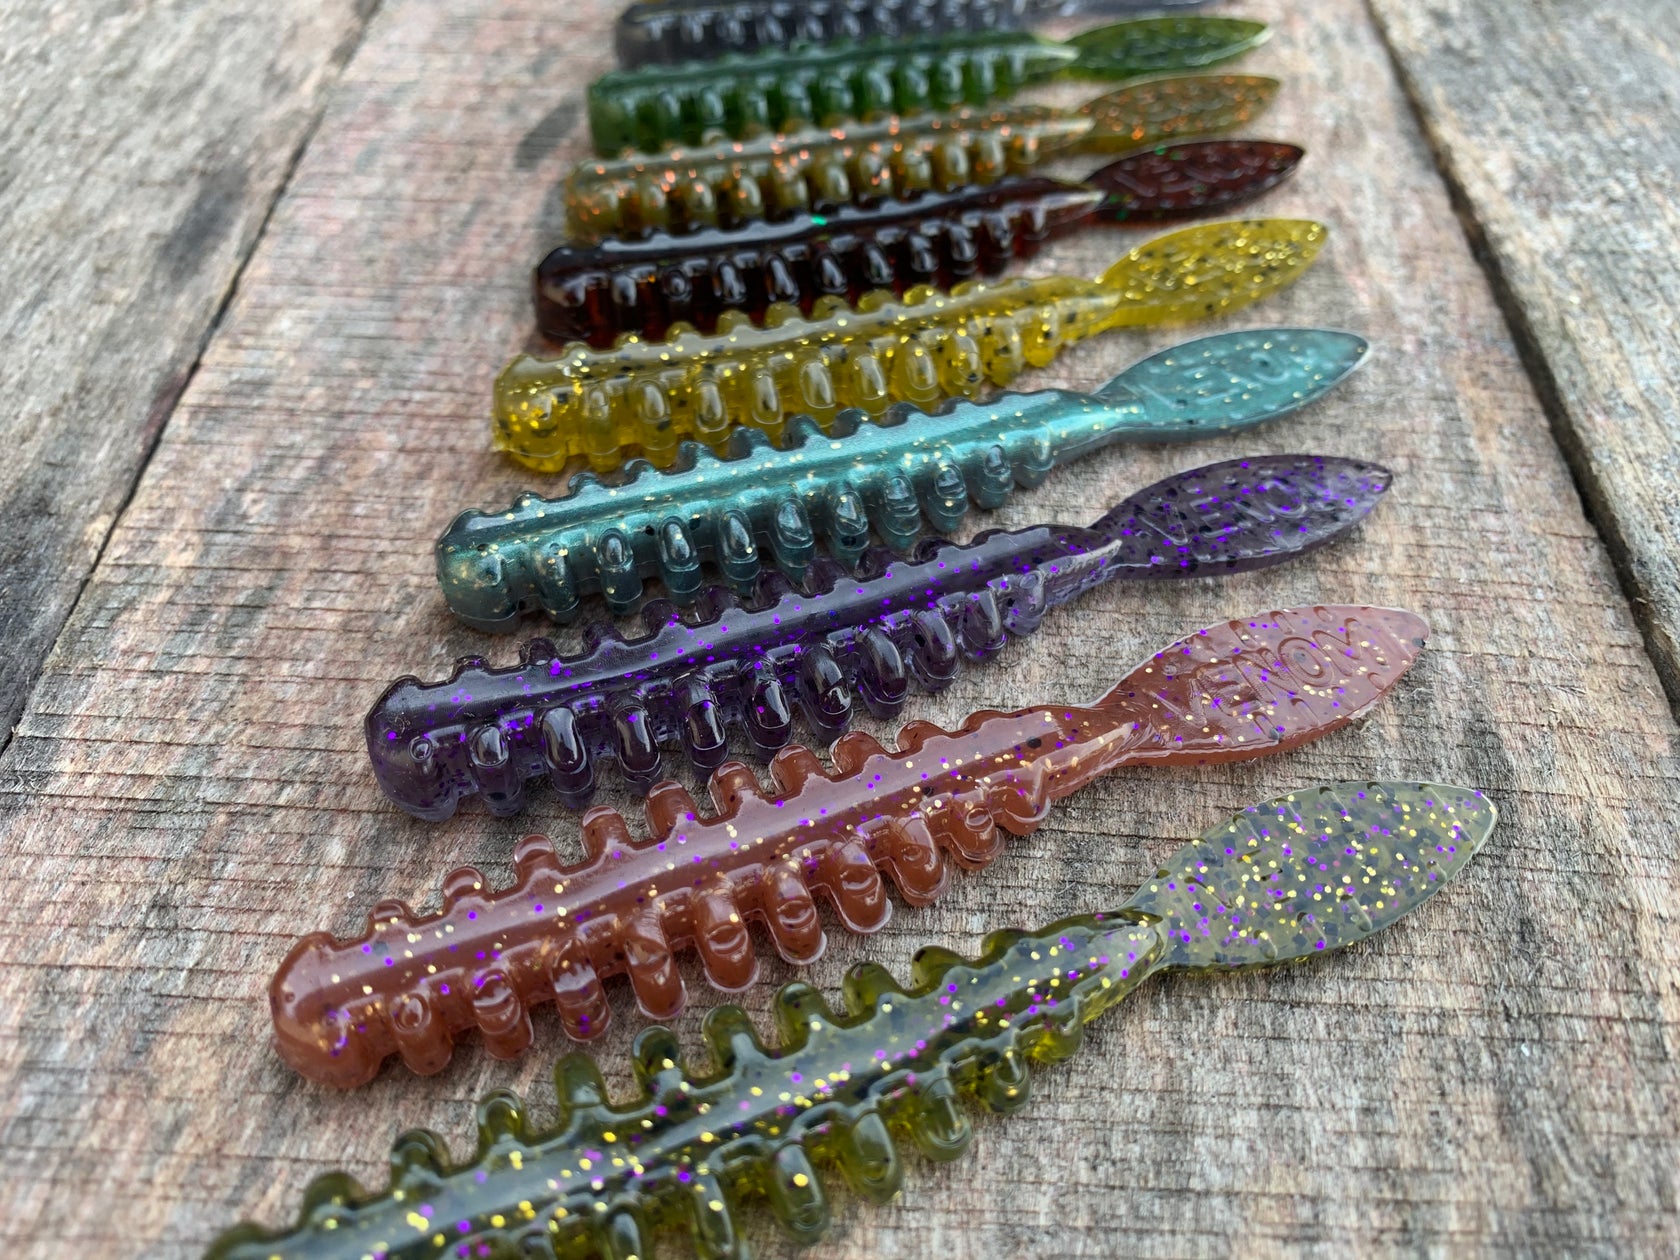 Venom Lures - Options galore for our New Mini D-K Rig